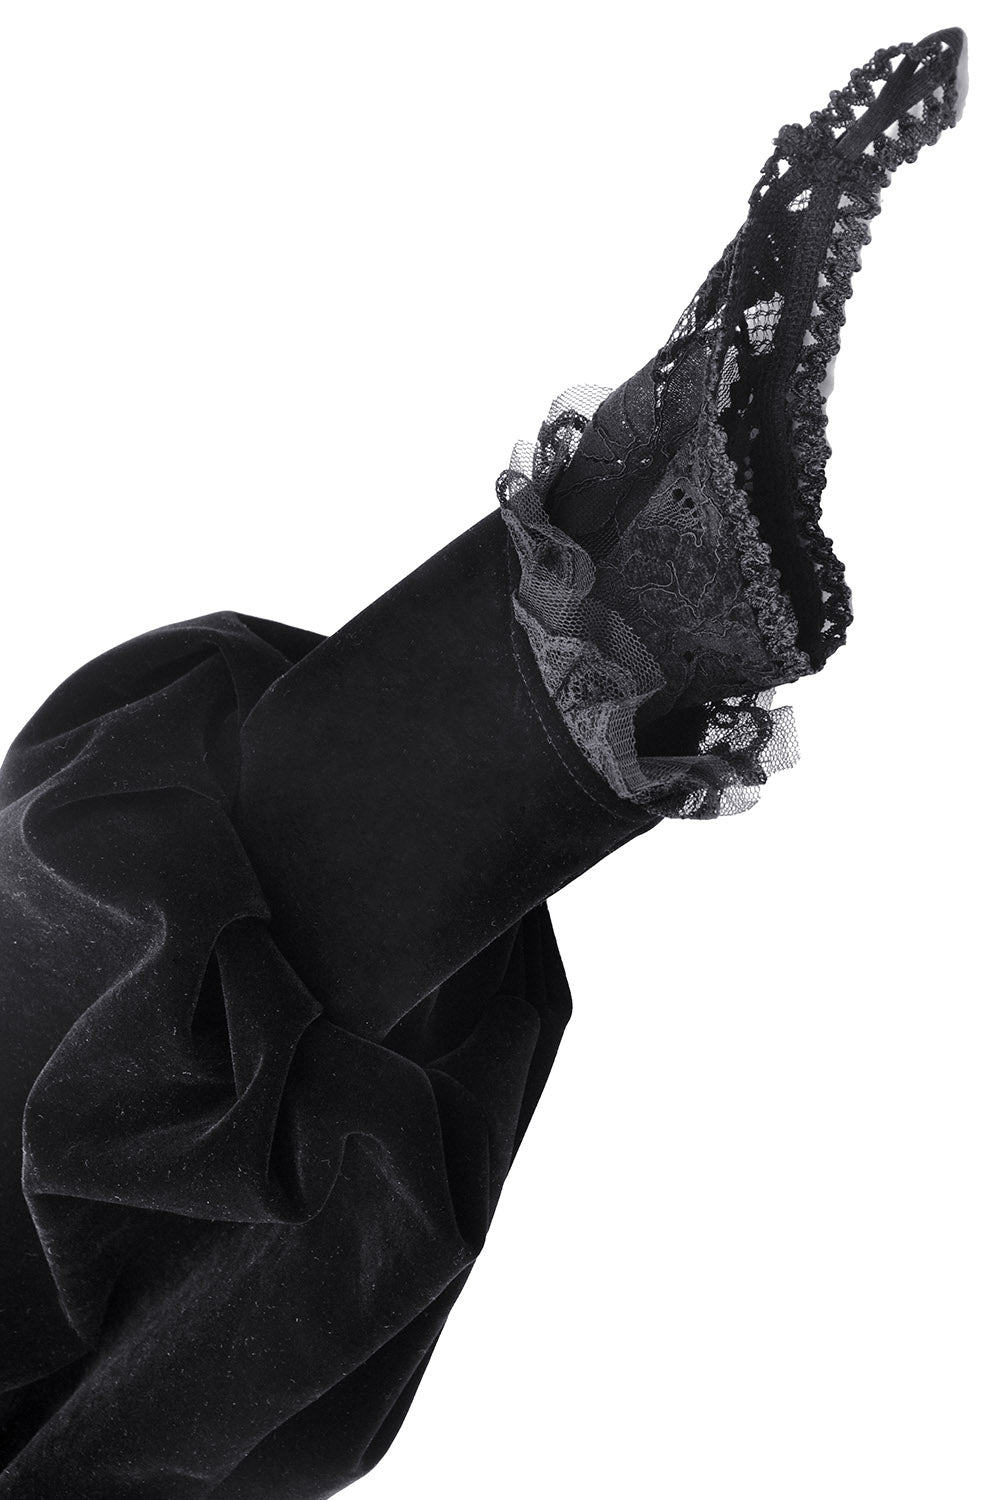 gothic shrug with gloves attached